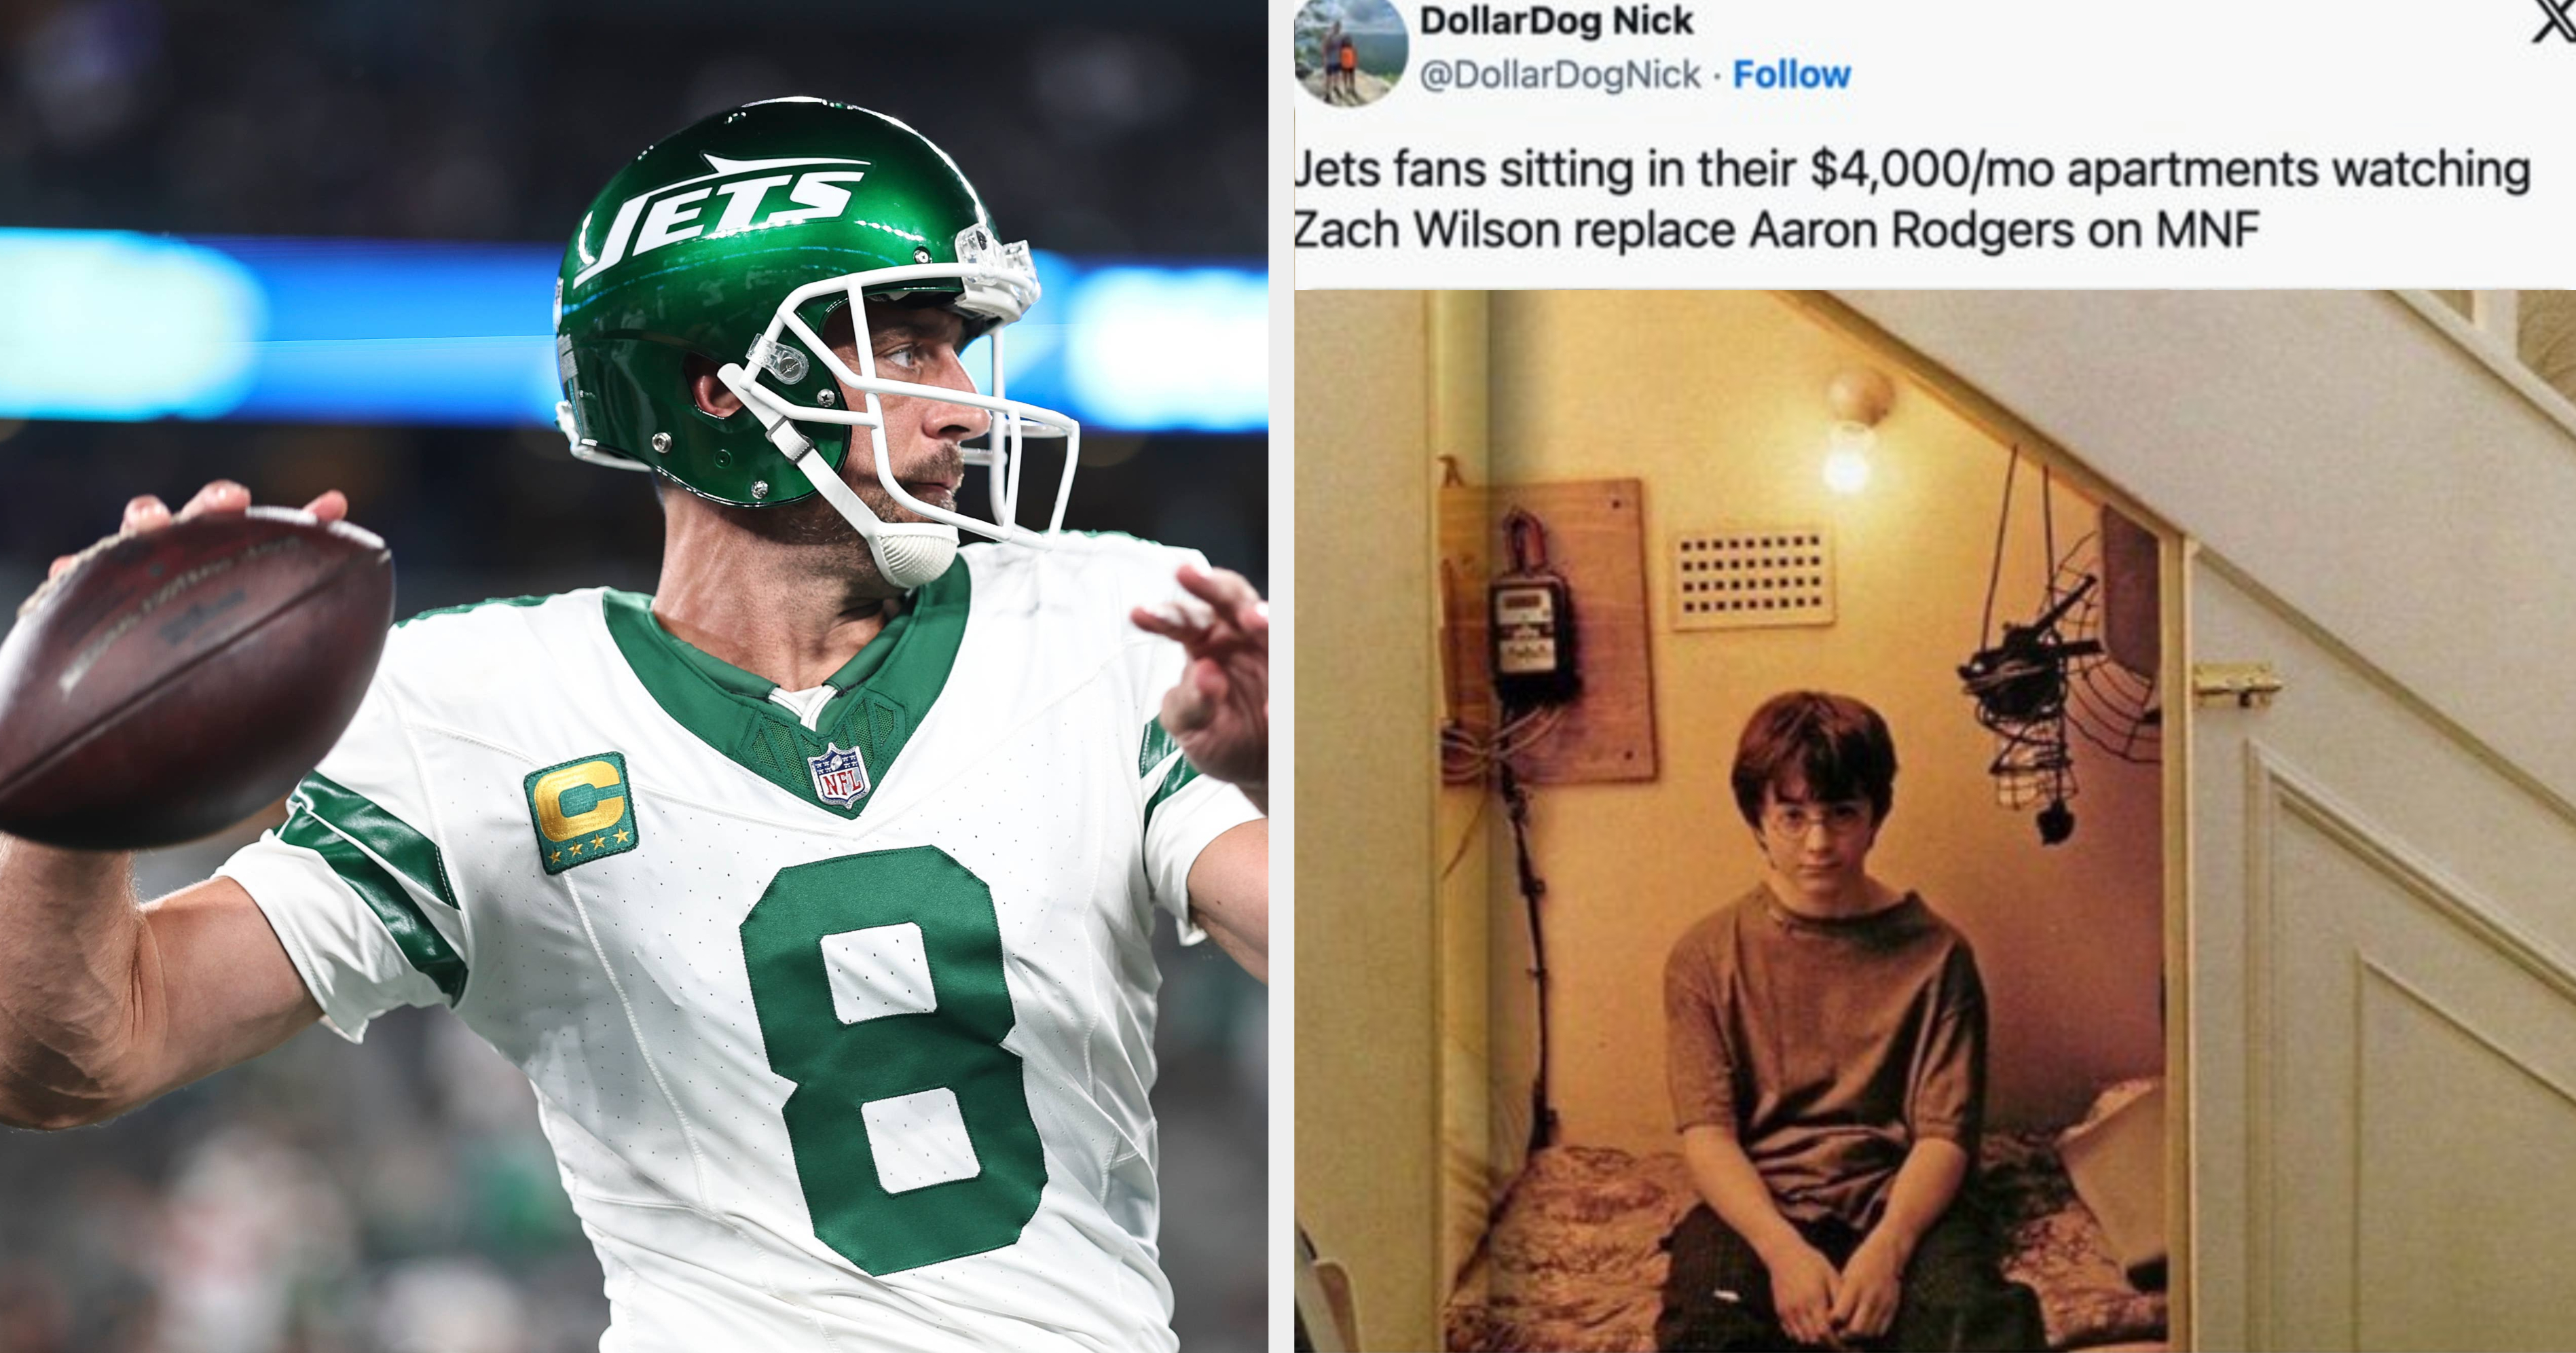 The Internet Reacts To Aaron Rodgers' Season Ending Injury